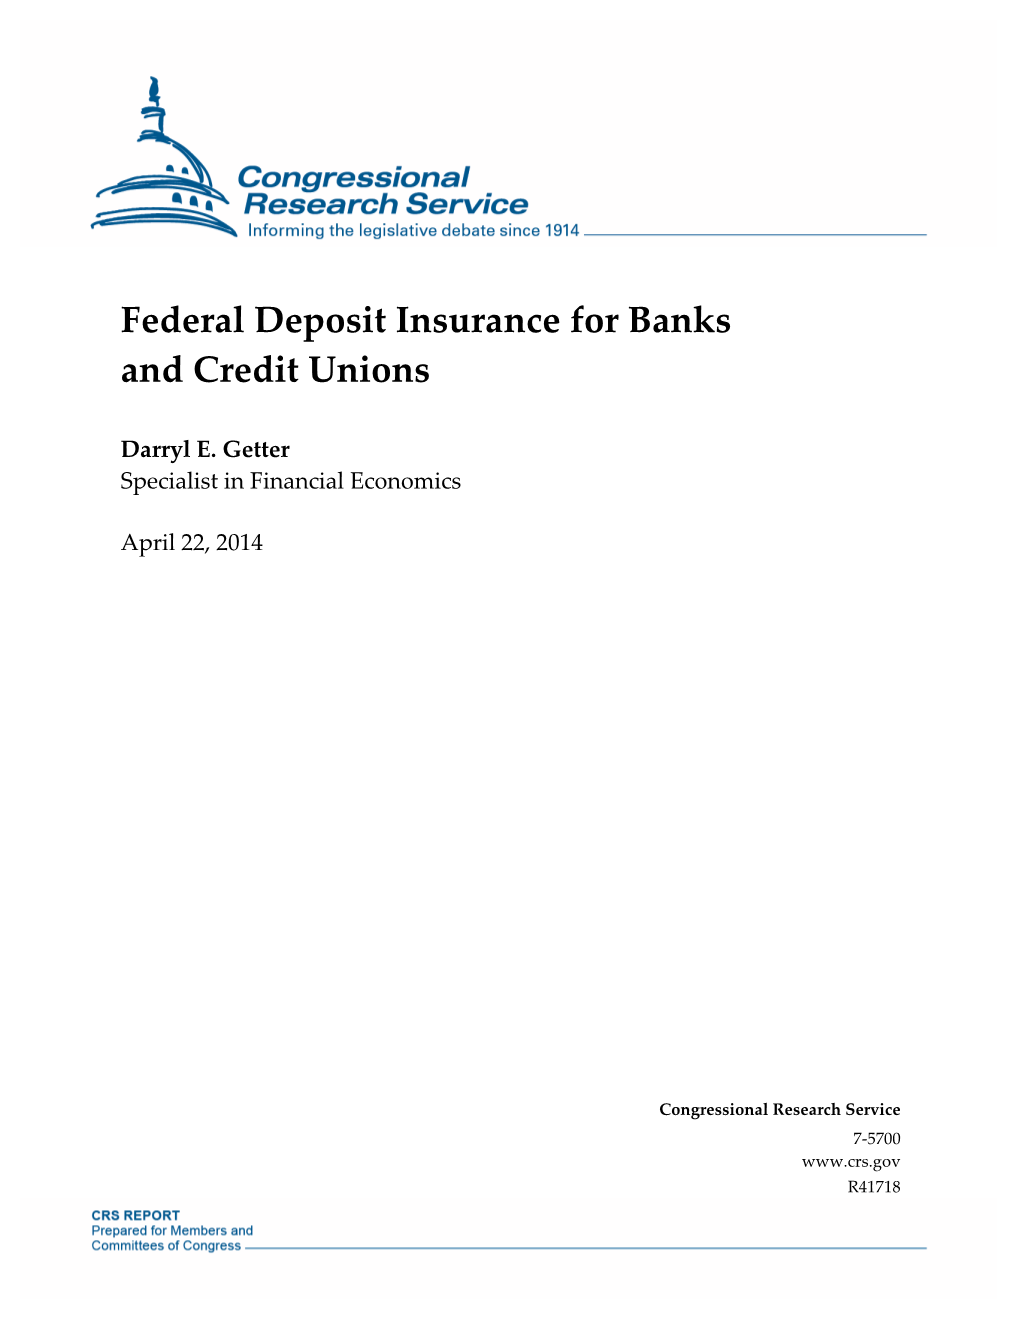 Federal Deposit Insurance for Banks and Credit Unions